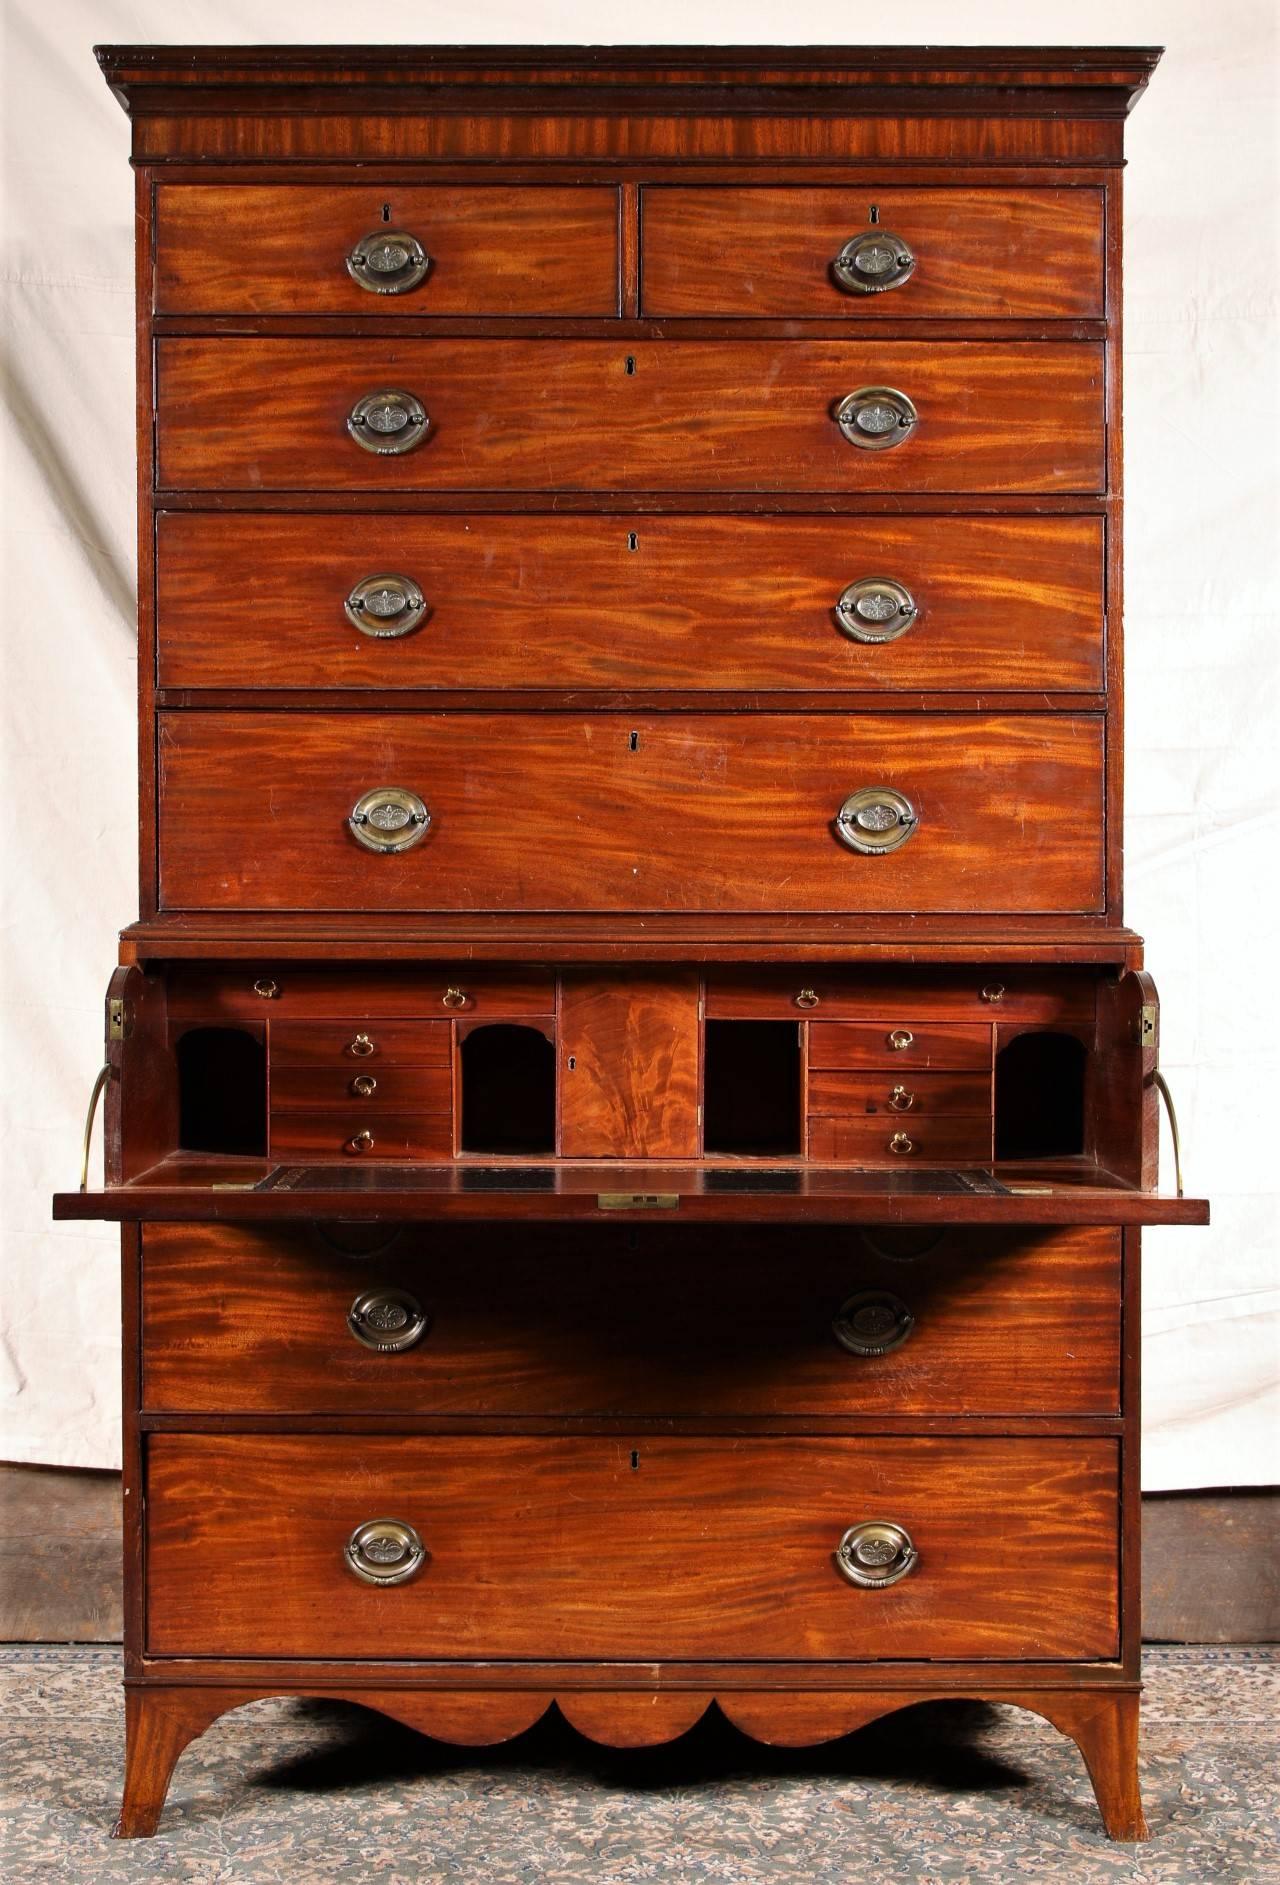 Mahogany two over six drawers, bold reeded brass pulls with oak leaf and acorn casting, brass escutcheons, scalloped apron and resting on bracket feet. The interior is fitted with a central door and flanked by pigeon holes and shallow drawers. The